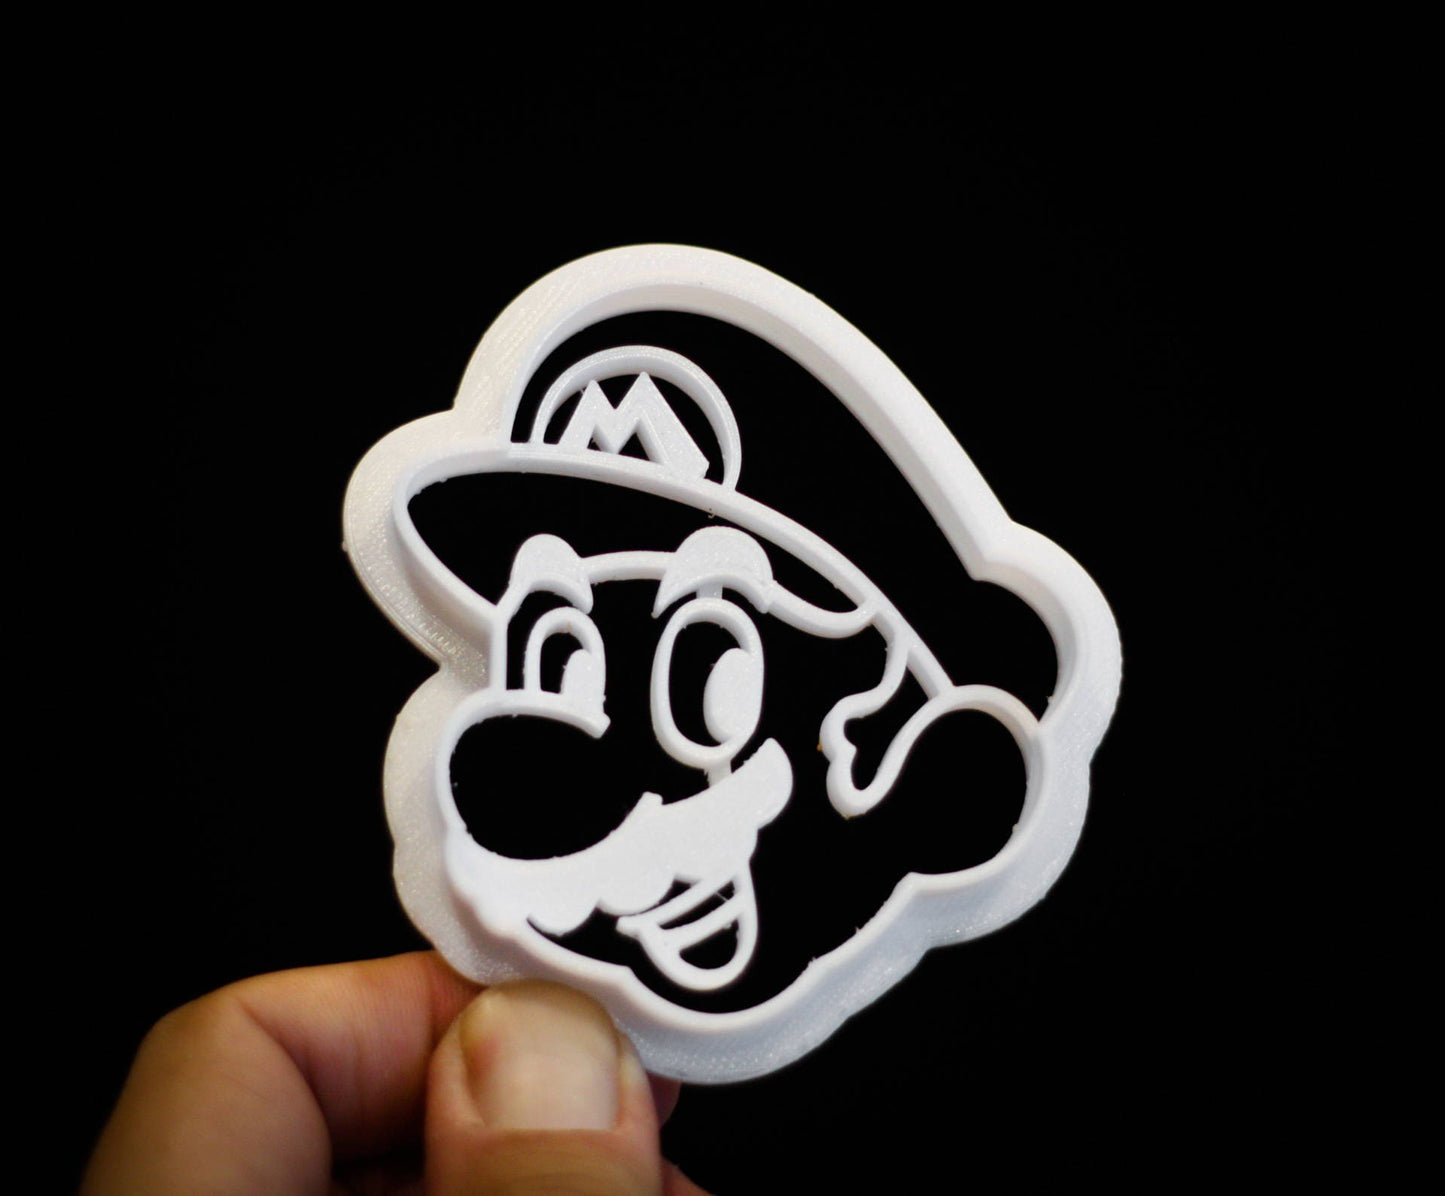 Super Mario Cookie Cutter | Fondant cutter | Super mario Birthday Party | Video Game Cookie Cutters | super mario bros cookie mold - 3DPrintProps